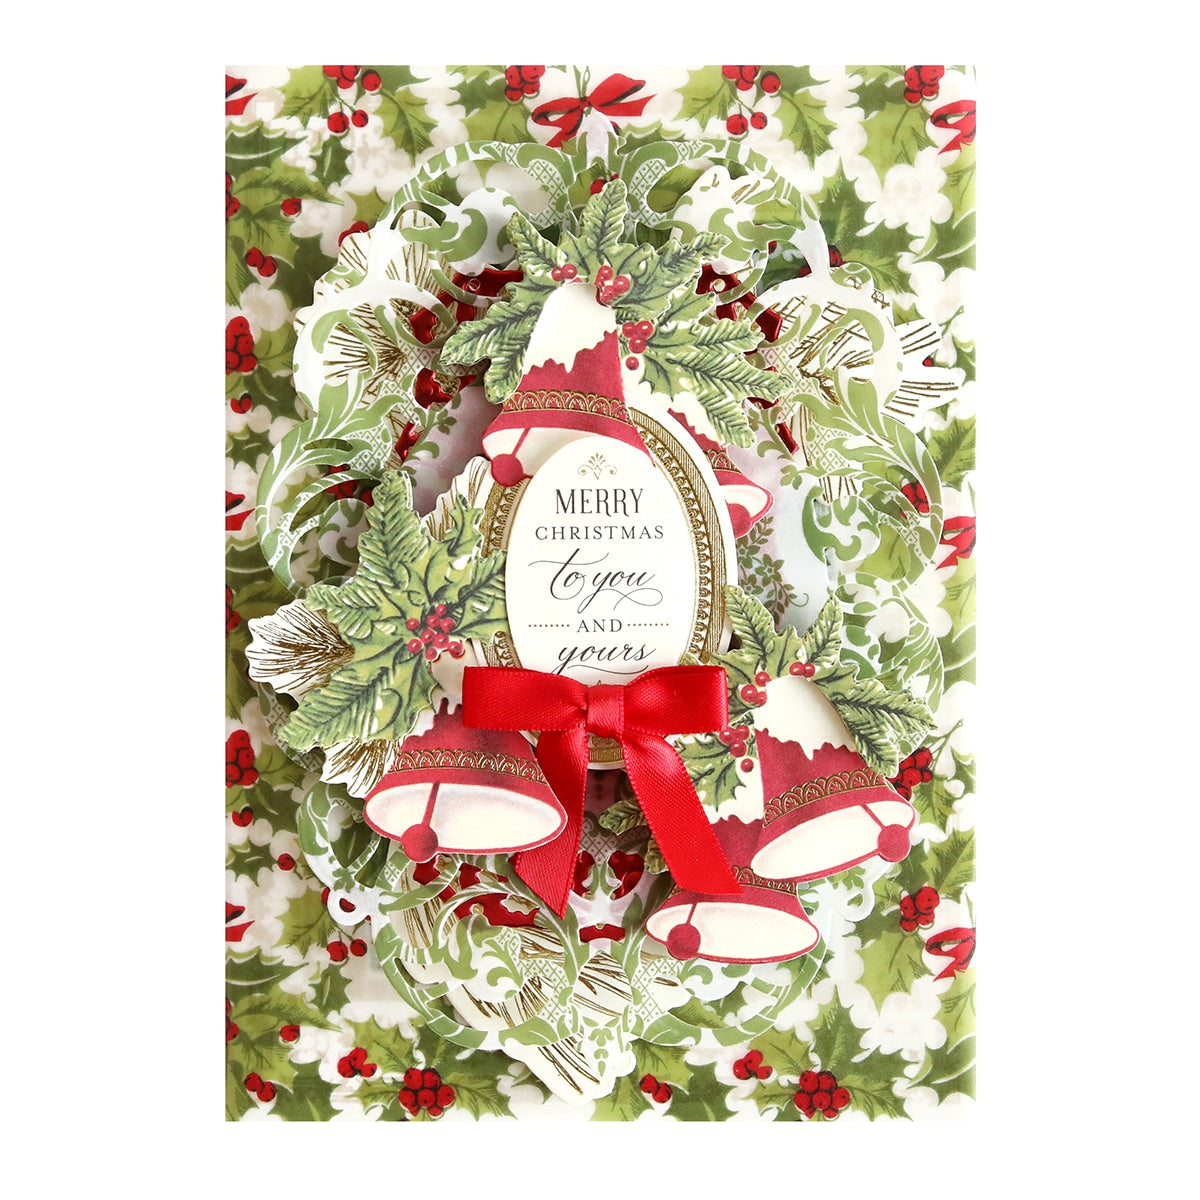 A Holiday Vellum Card and Envelopes with holly and bells on it.